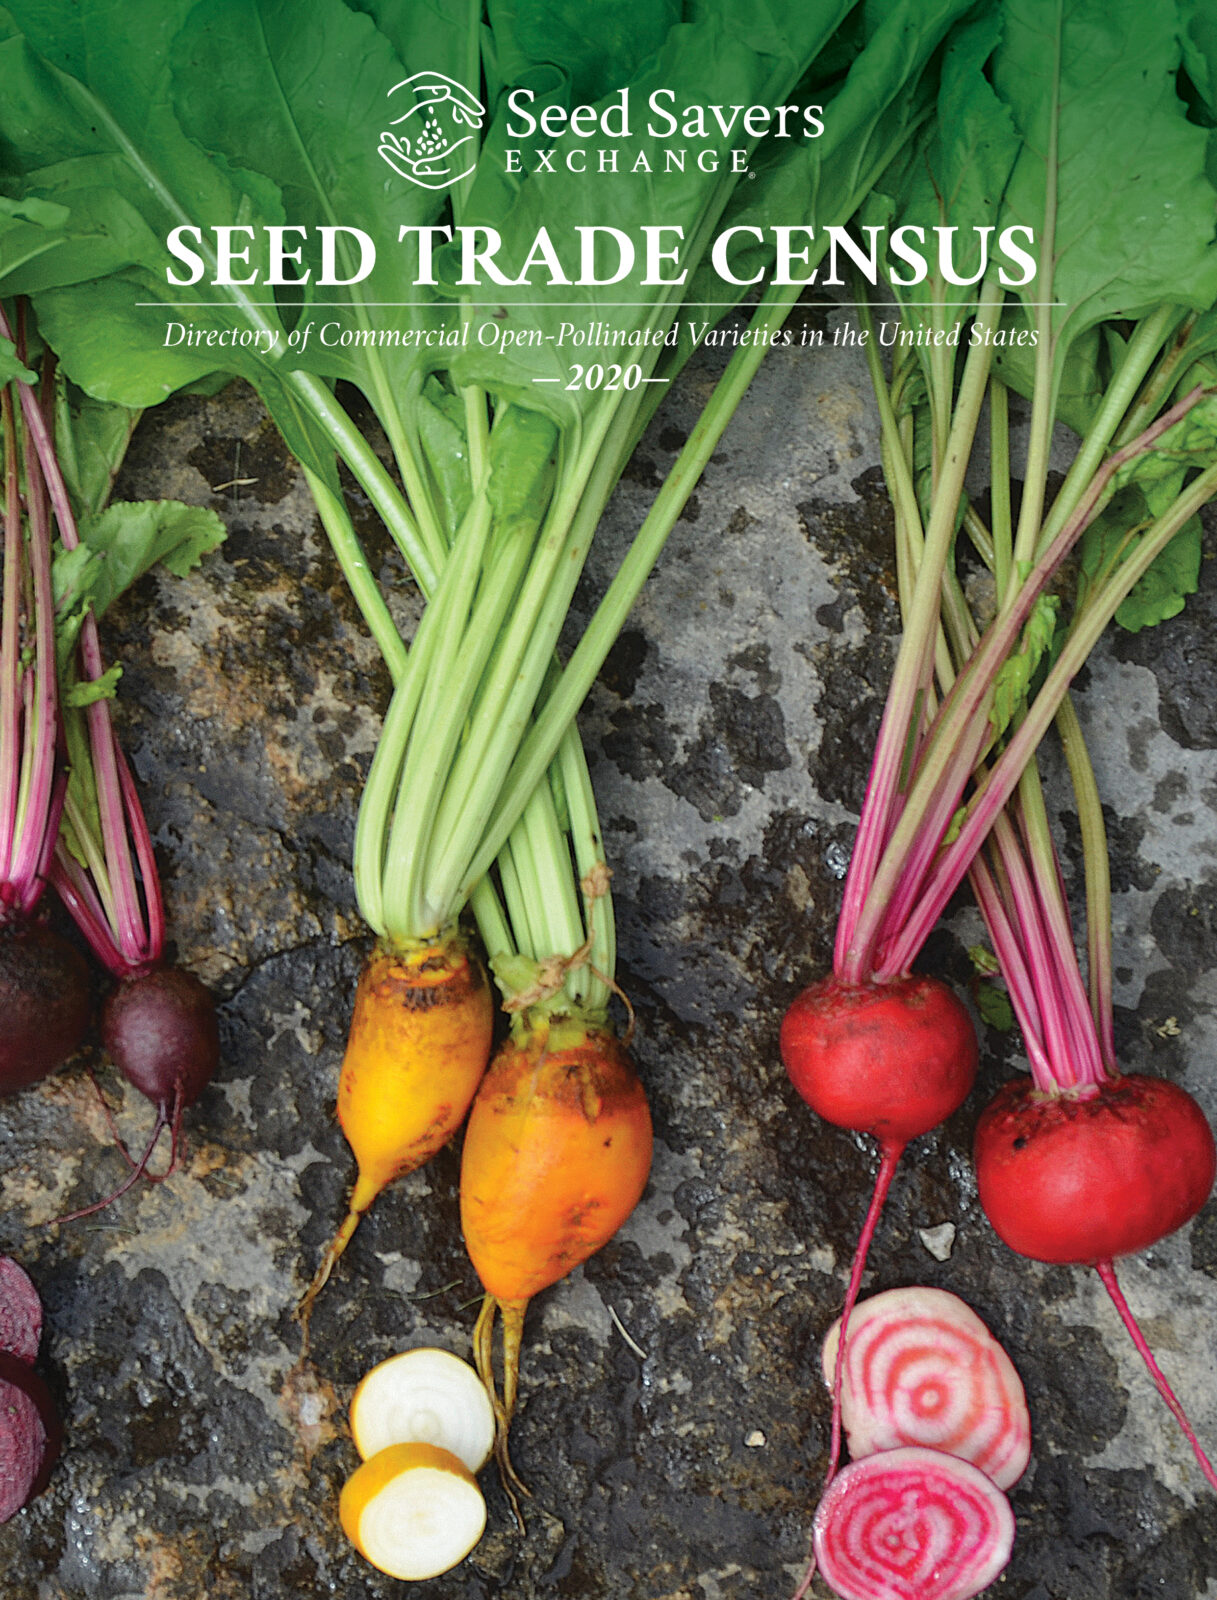 Seed Trade Census cover image of three beet varieties to highlight biodiversity.